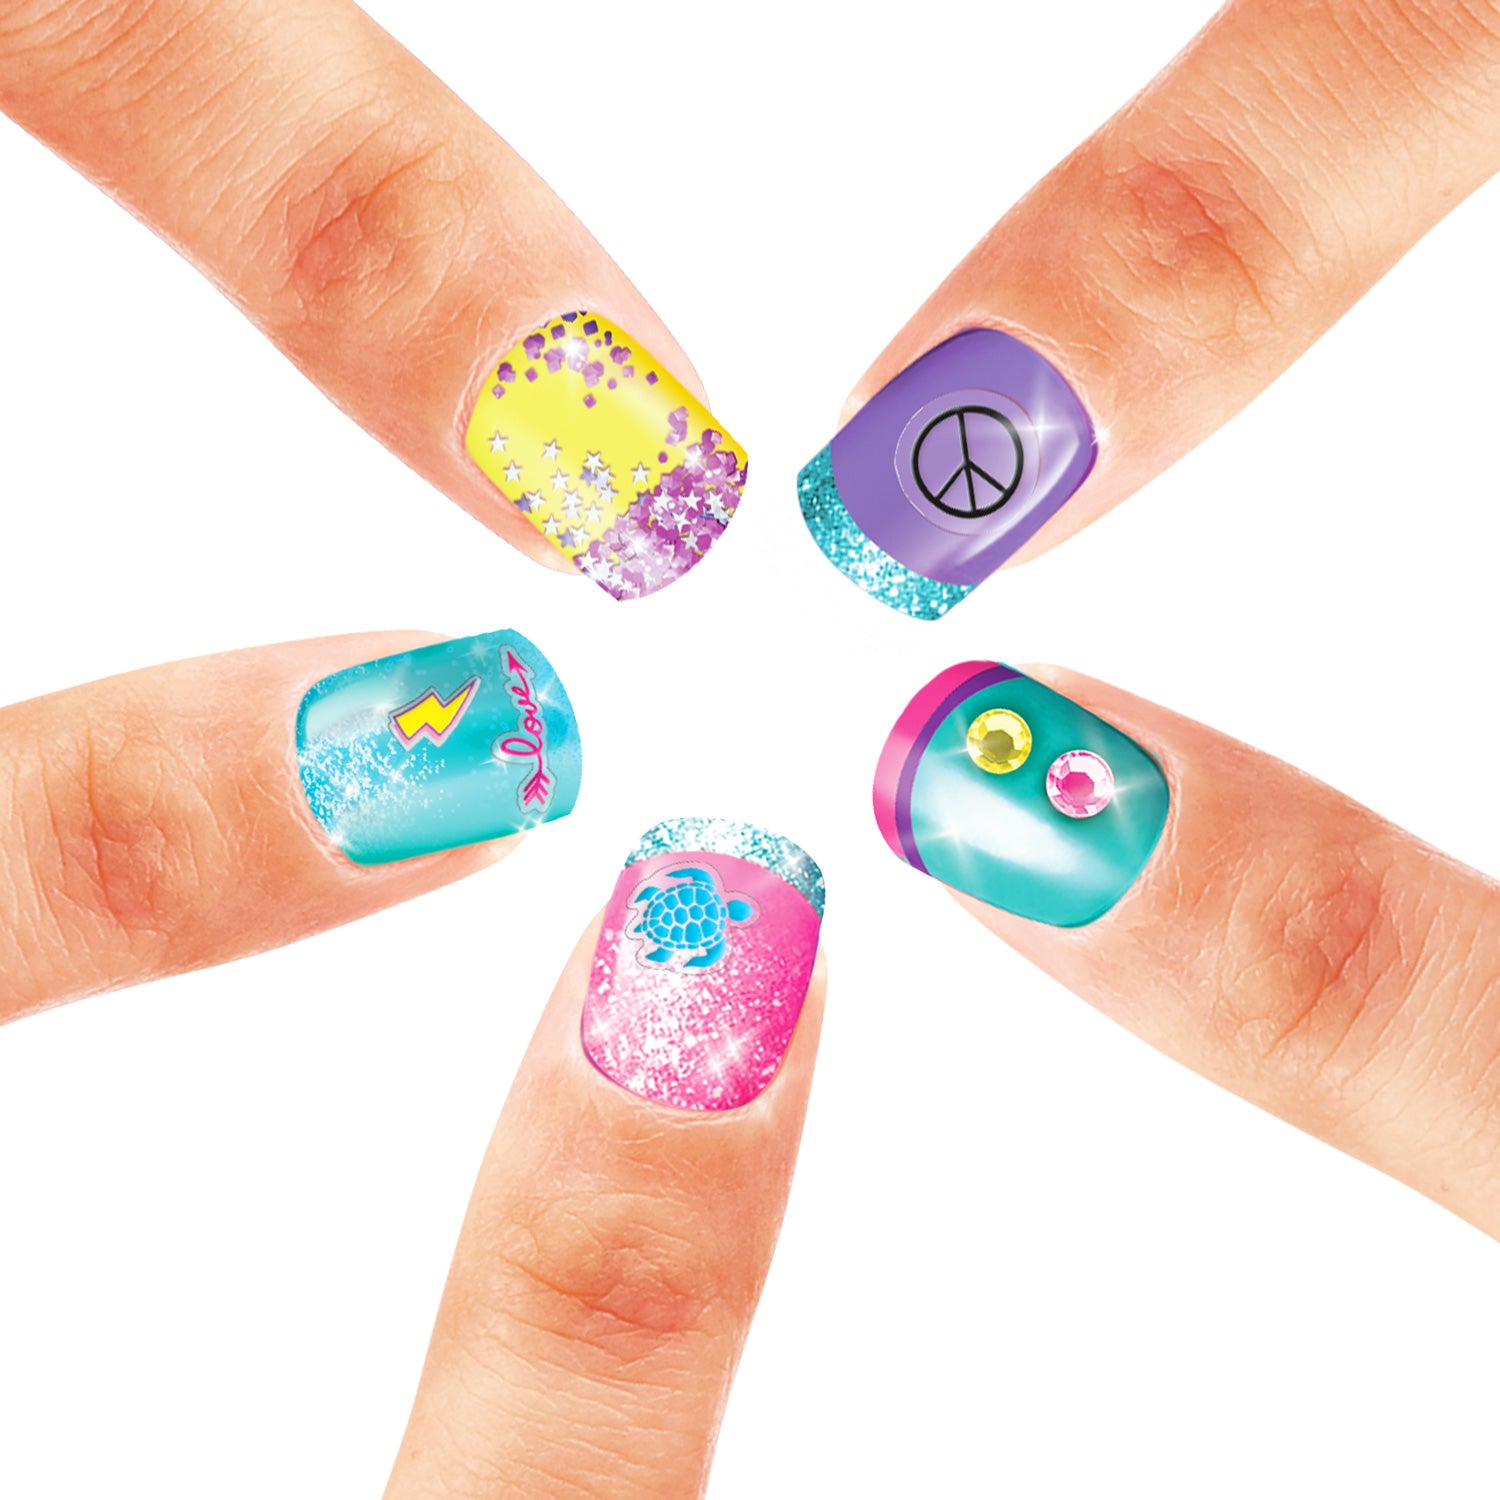 Acrylic Nail Art Kit Price in Pakistan - View Latest Collection of Nail Art  & Stickers